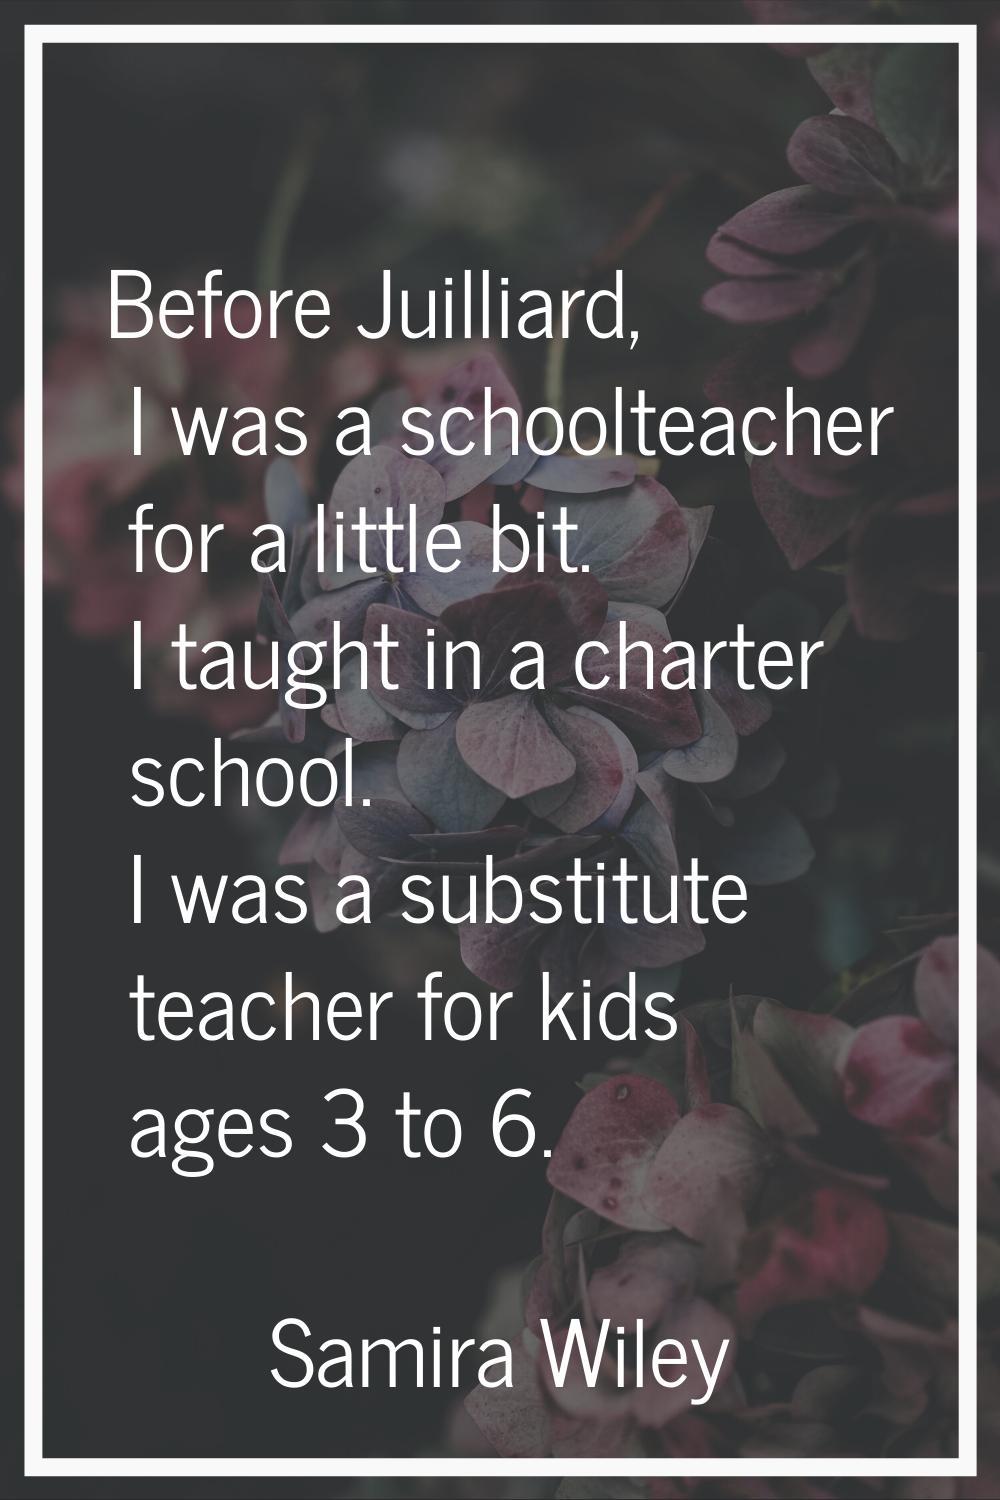 Before Juilliard, I was a schoolteacher for a little bit. I taught in a charter school. I was a sub